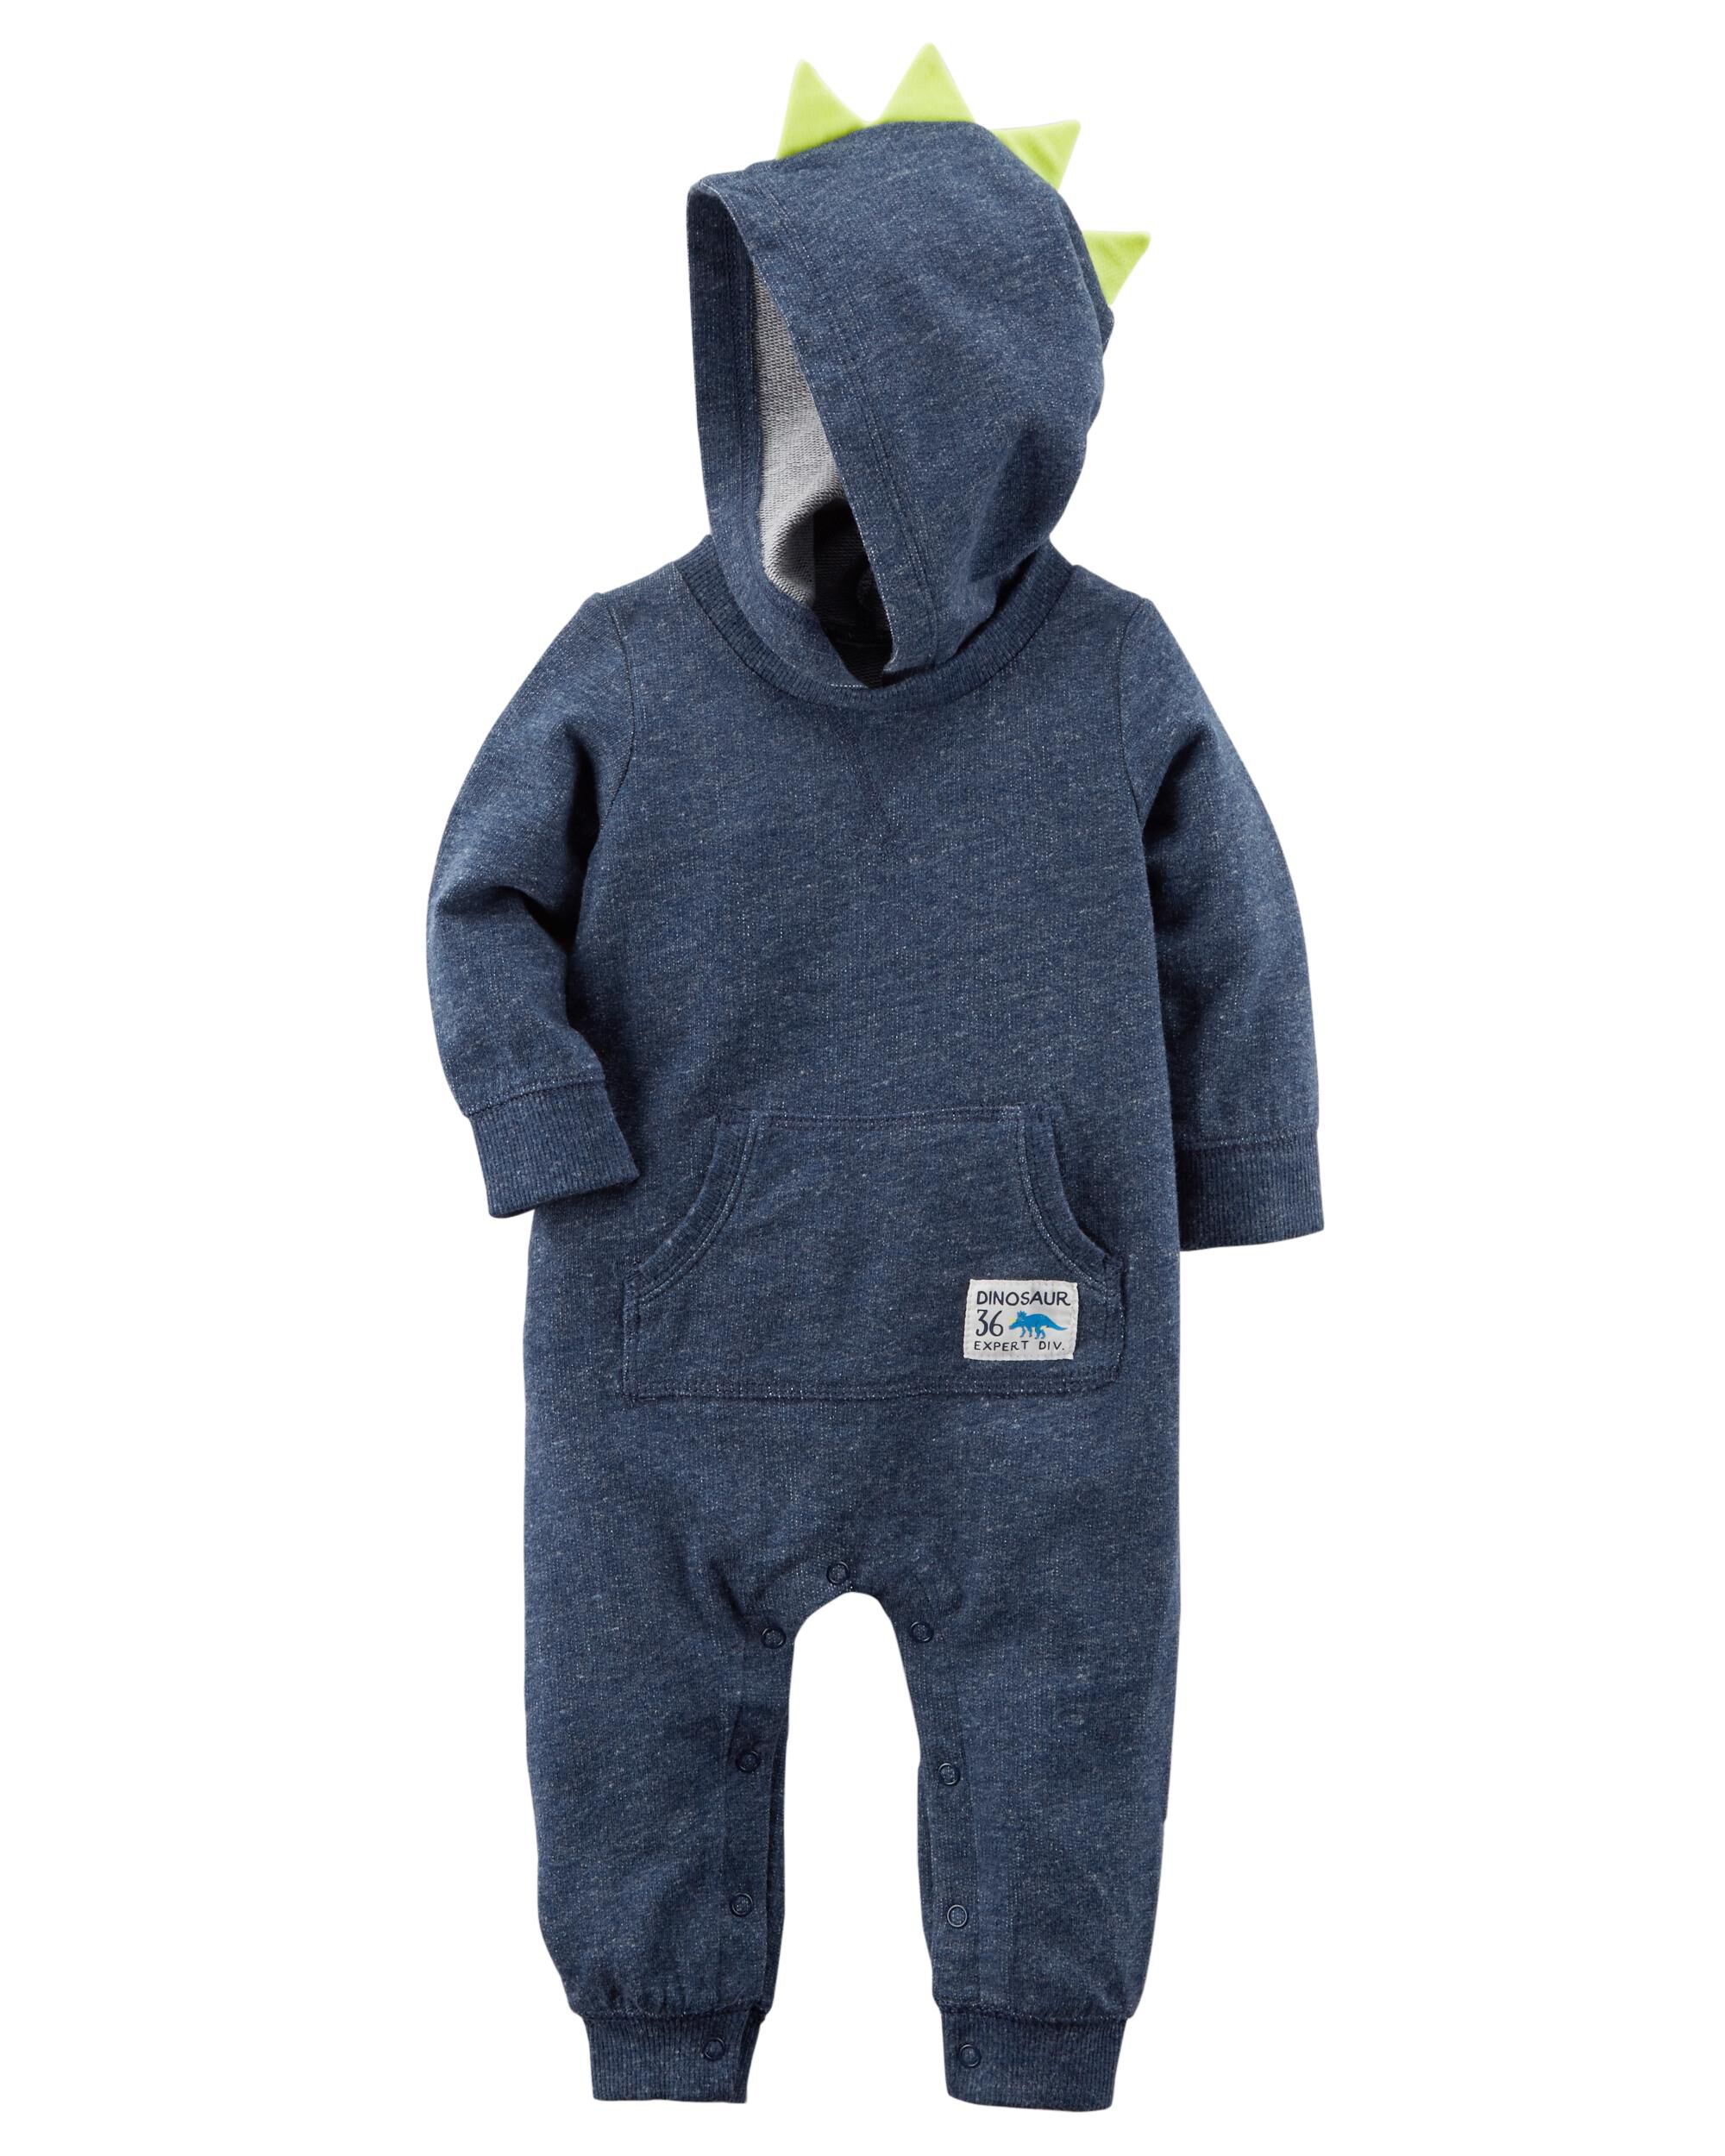 Baby Boy One-Piece Jumpsuits & Bodysuits | Carter's | Free Shipping